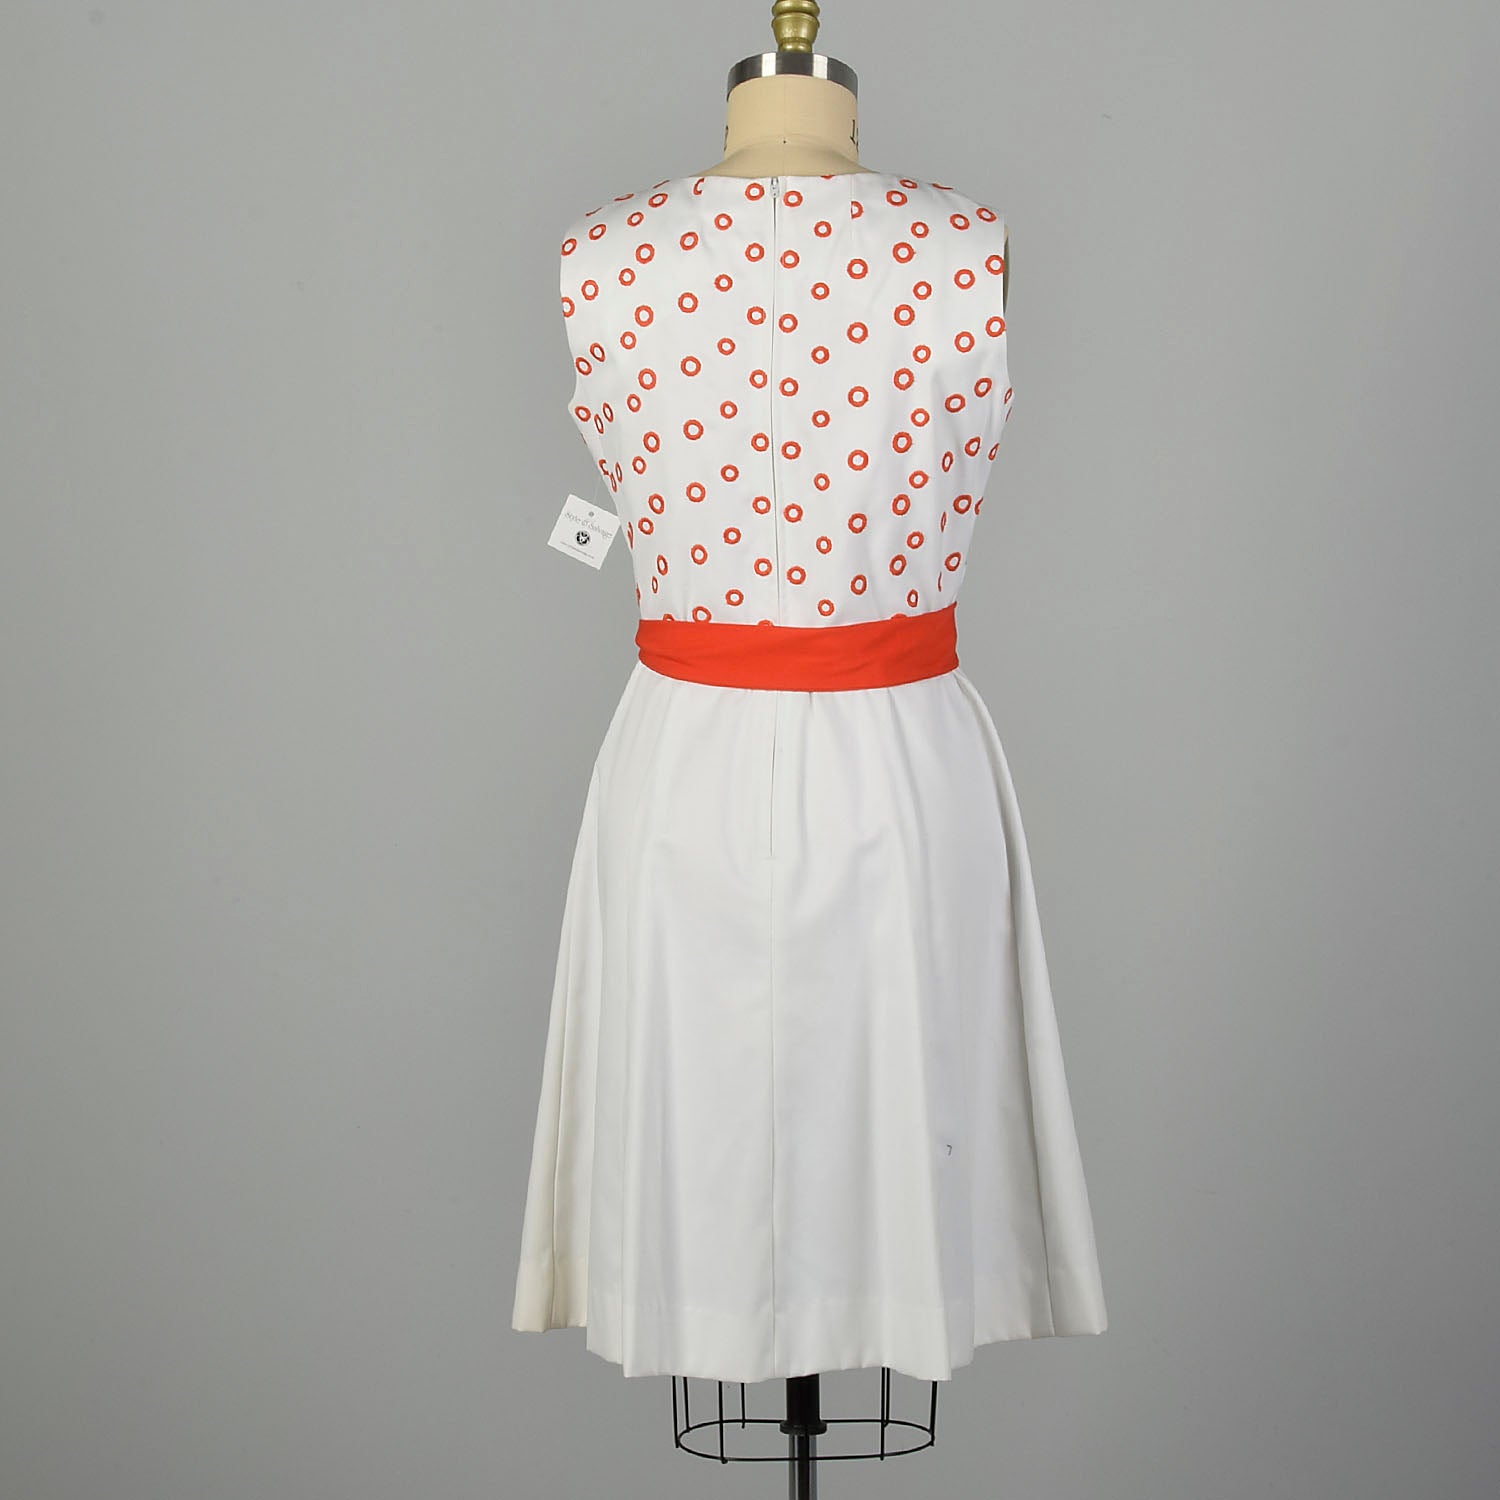 XL 1960s Pat Premo Dress White with Orange Embroidery and Bow